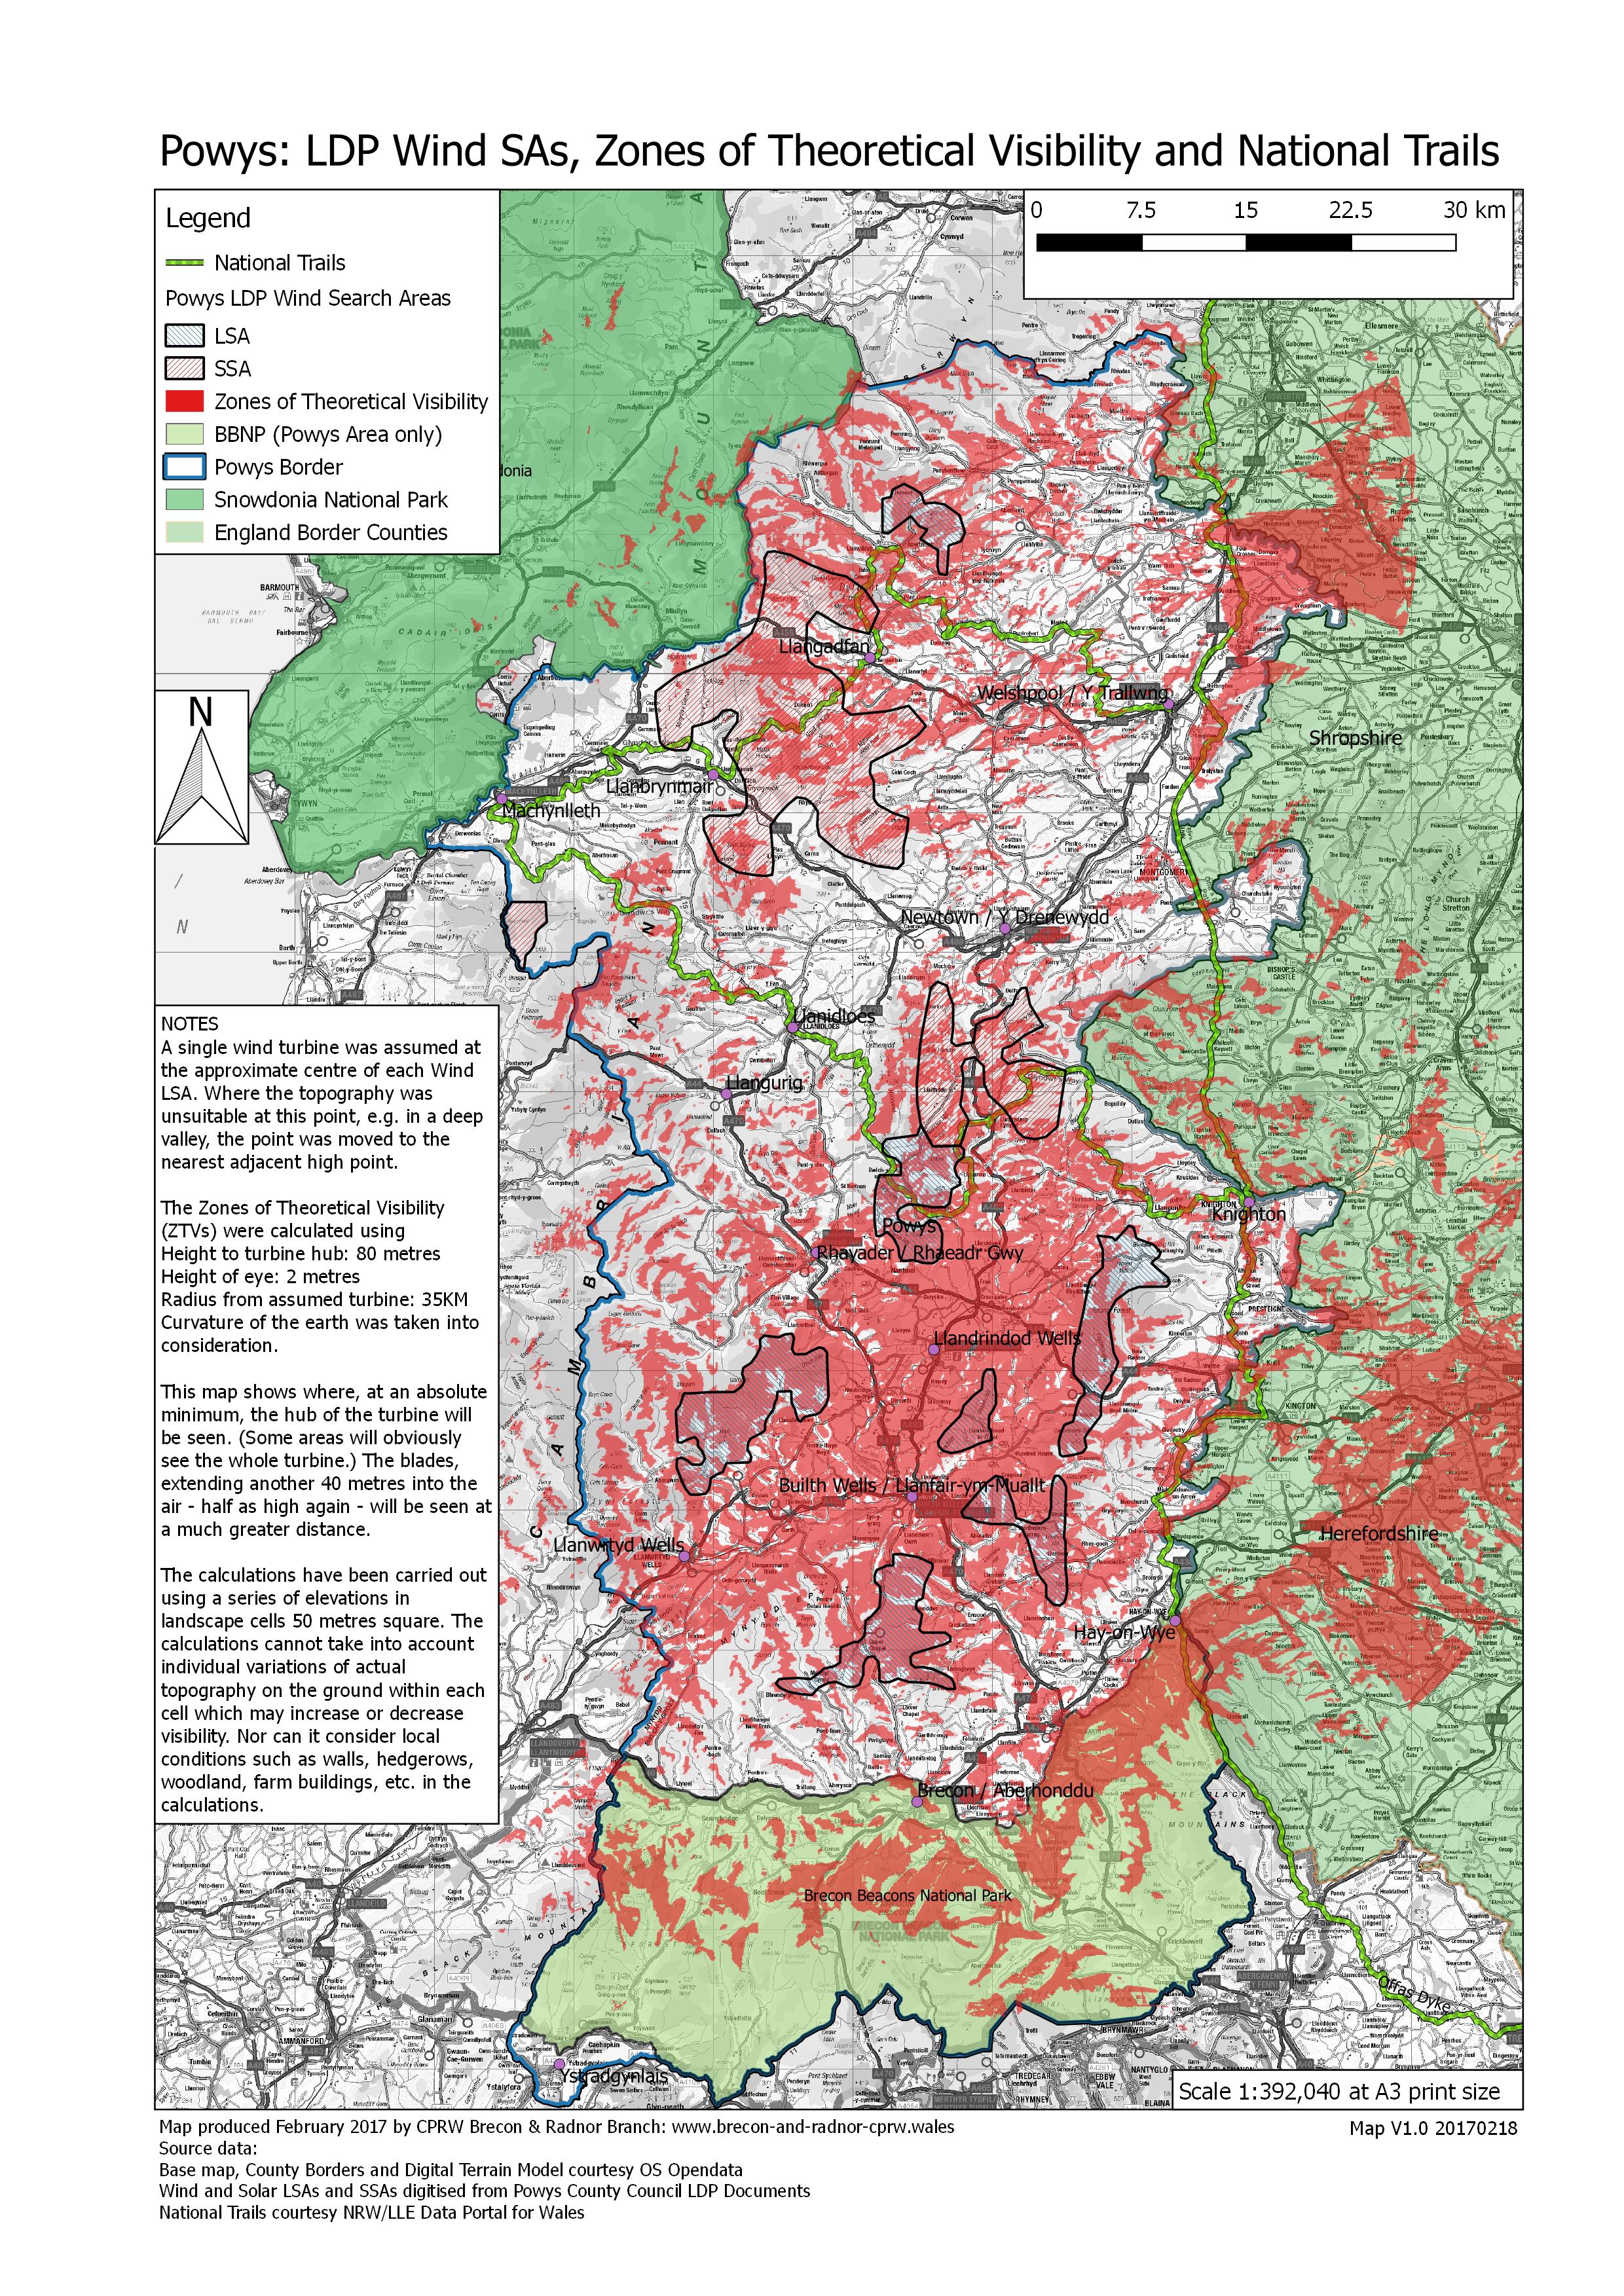 Map 4: Powys LDP Area: Wind SAs, Zones of Theoretical Visibility and National Trails